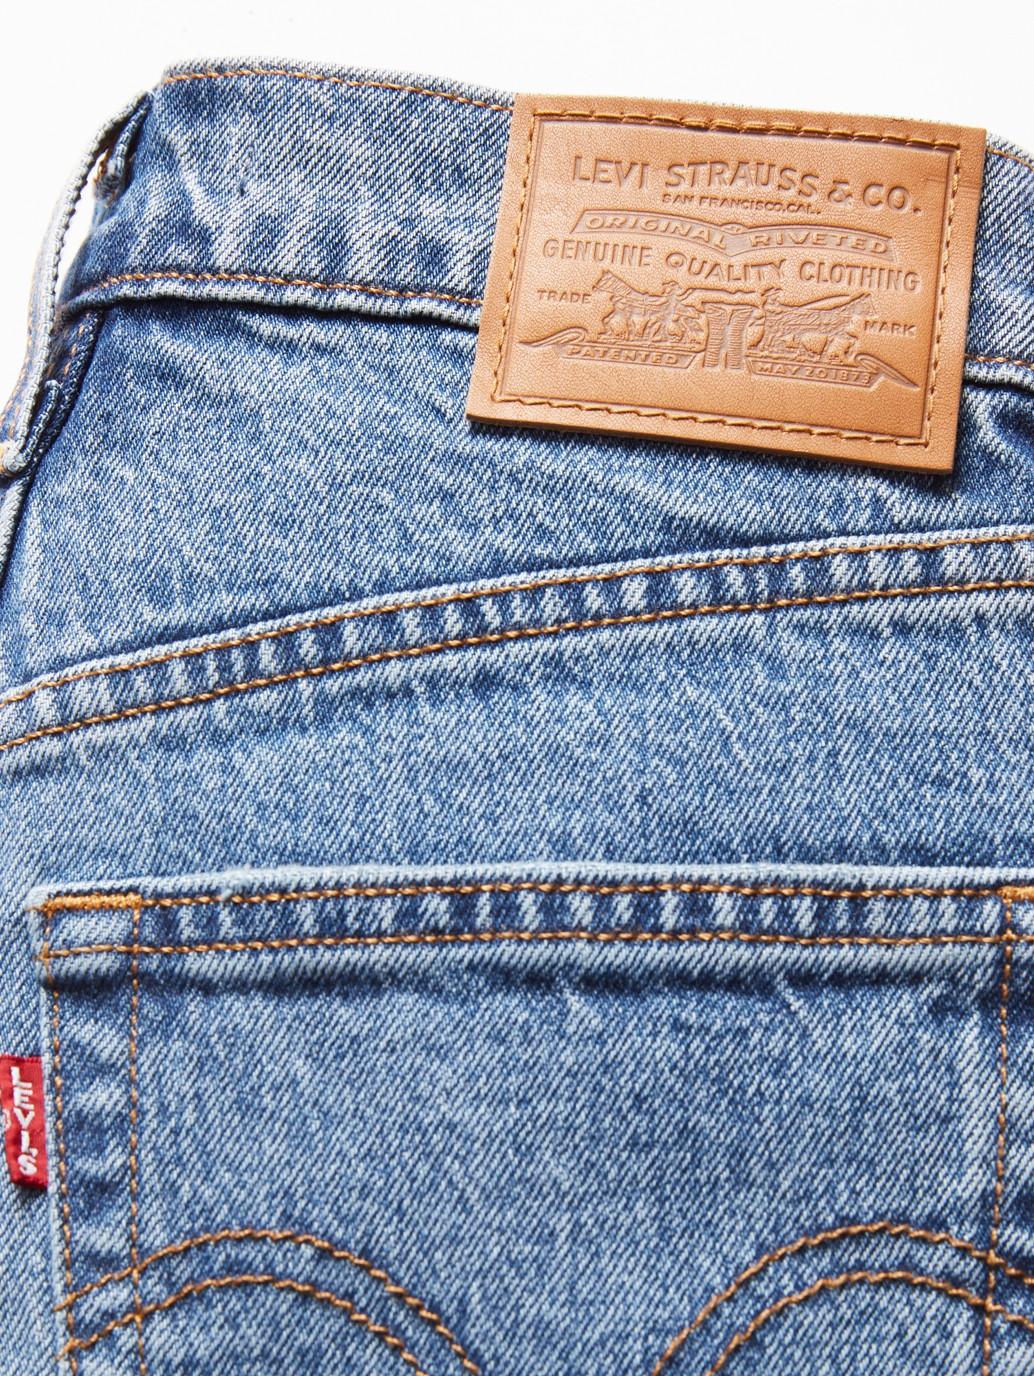 Buy Levi's® Women's Ribcage Bell Jeans| Levi's Official Online Store SG